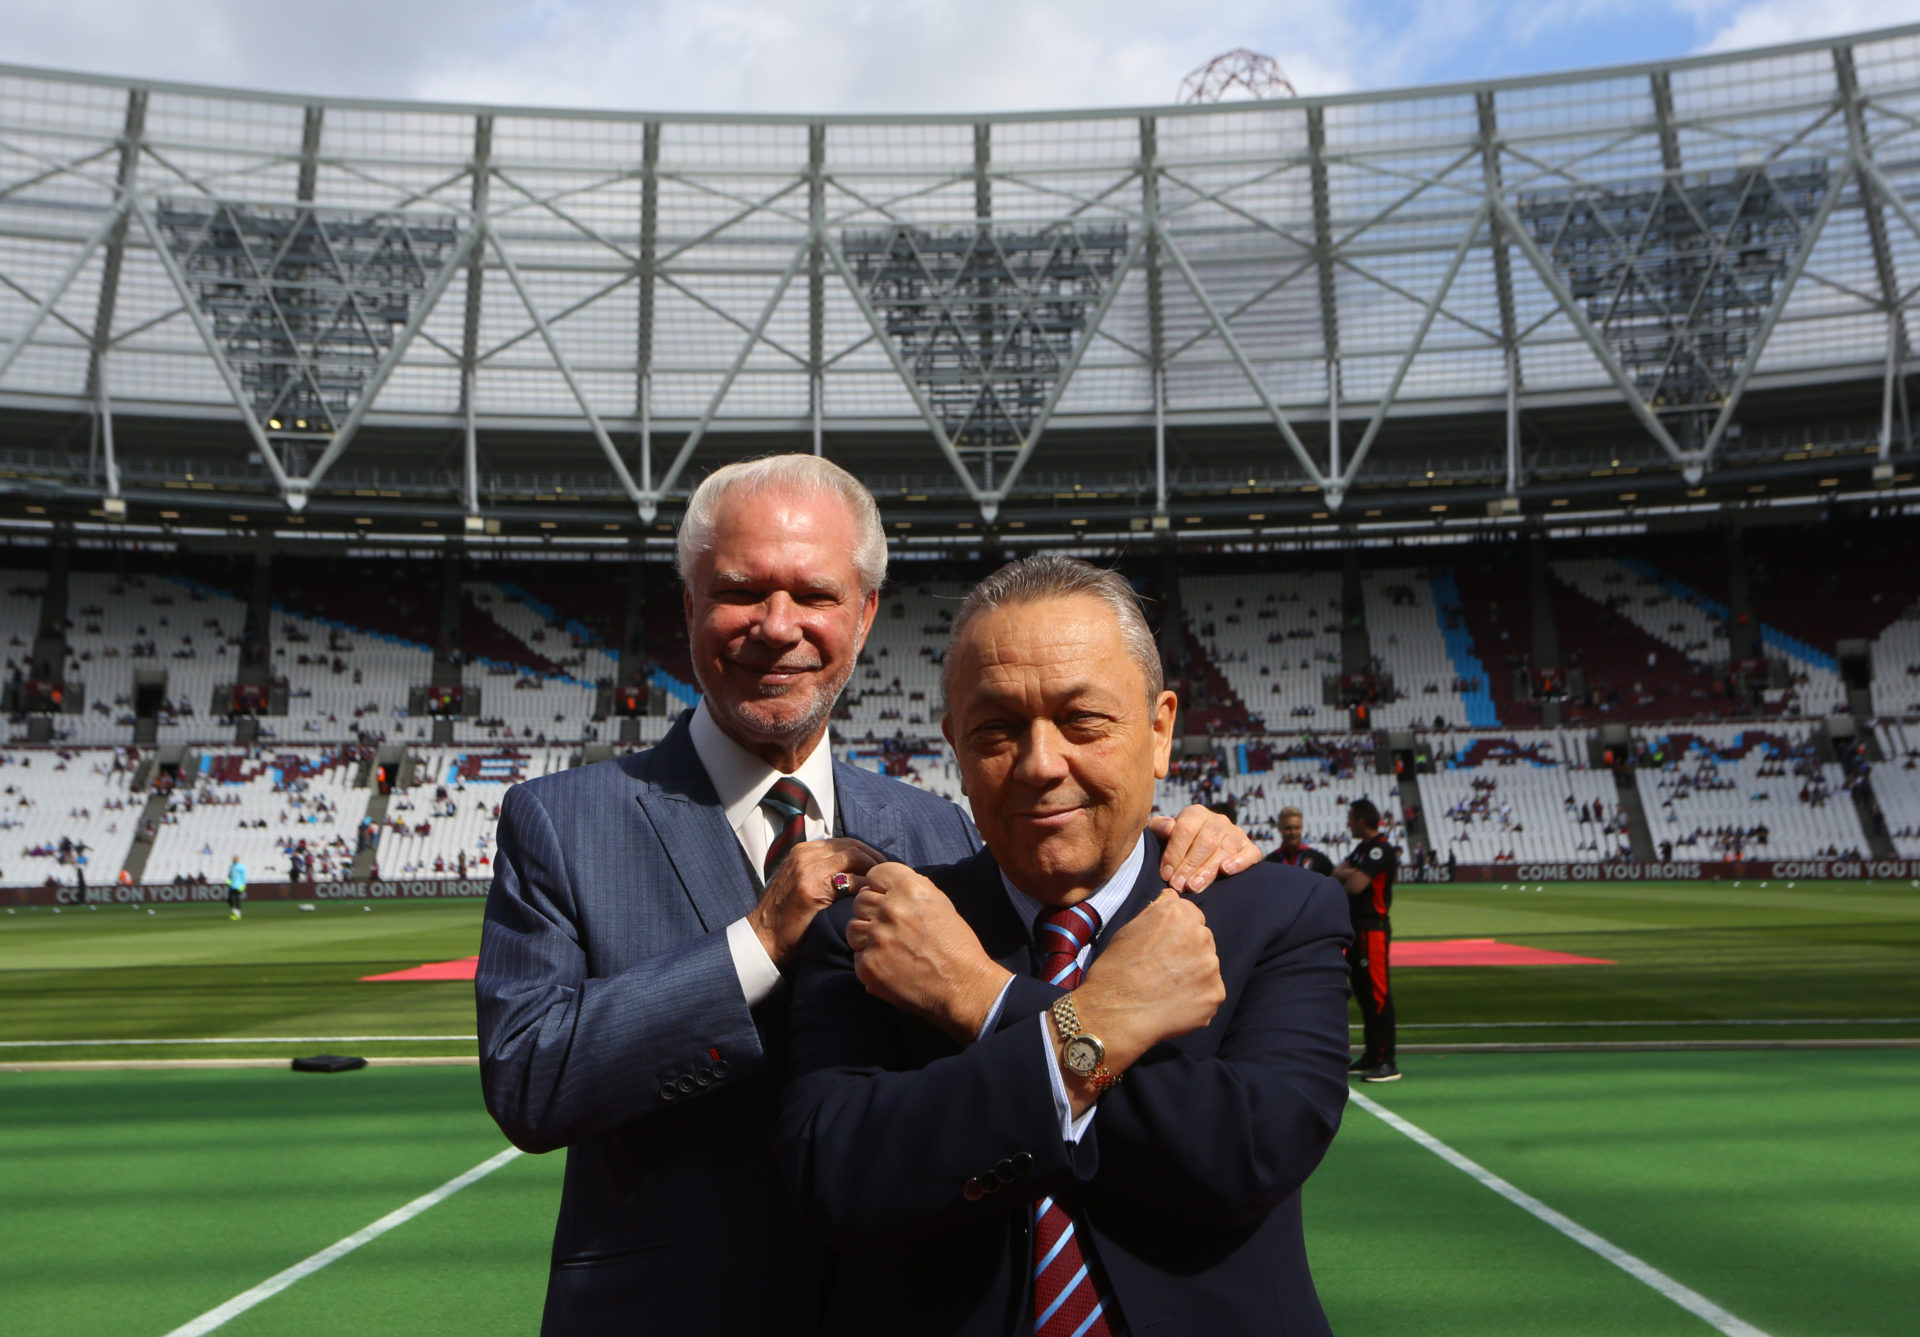 West Ham owners have made inept David Moyes decision